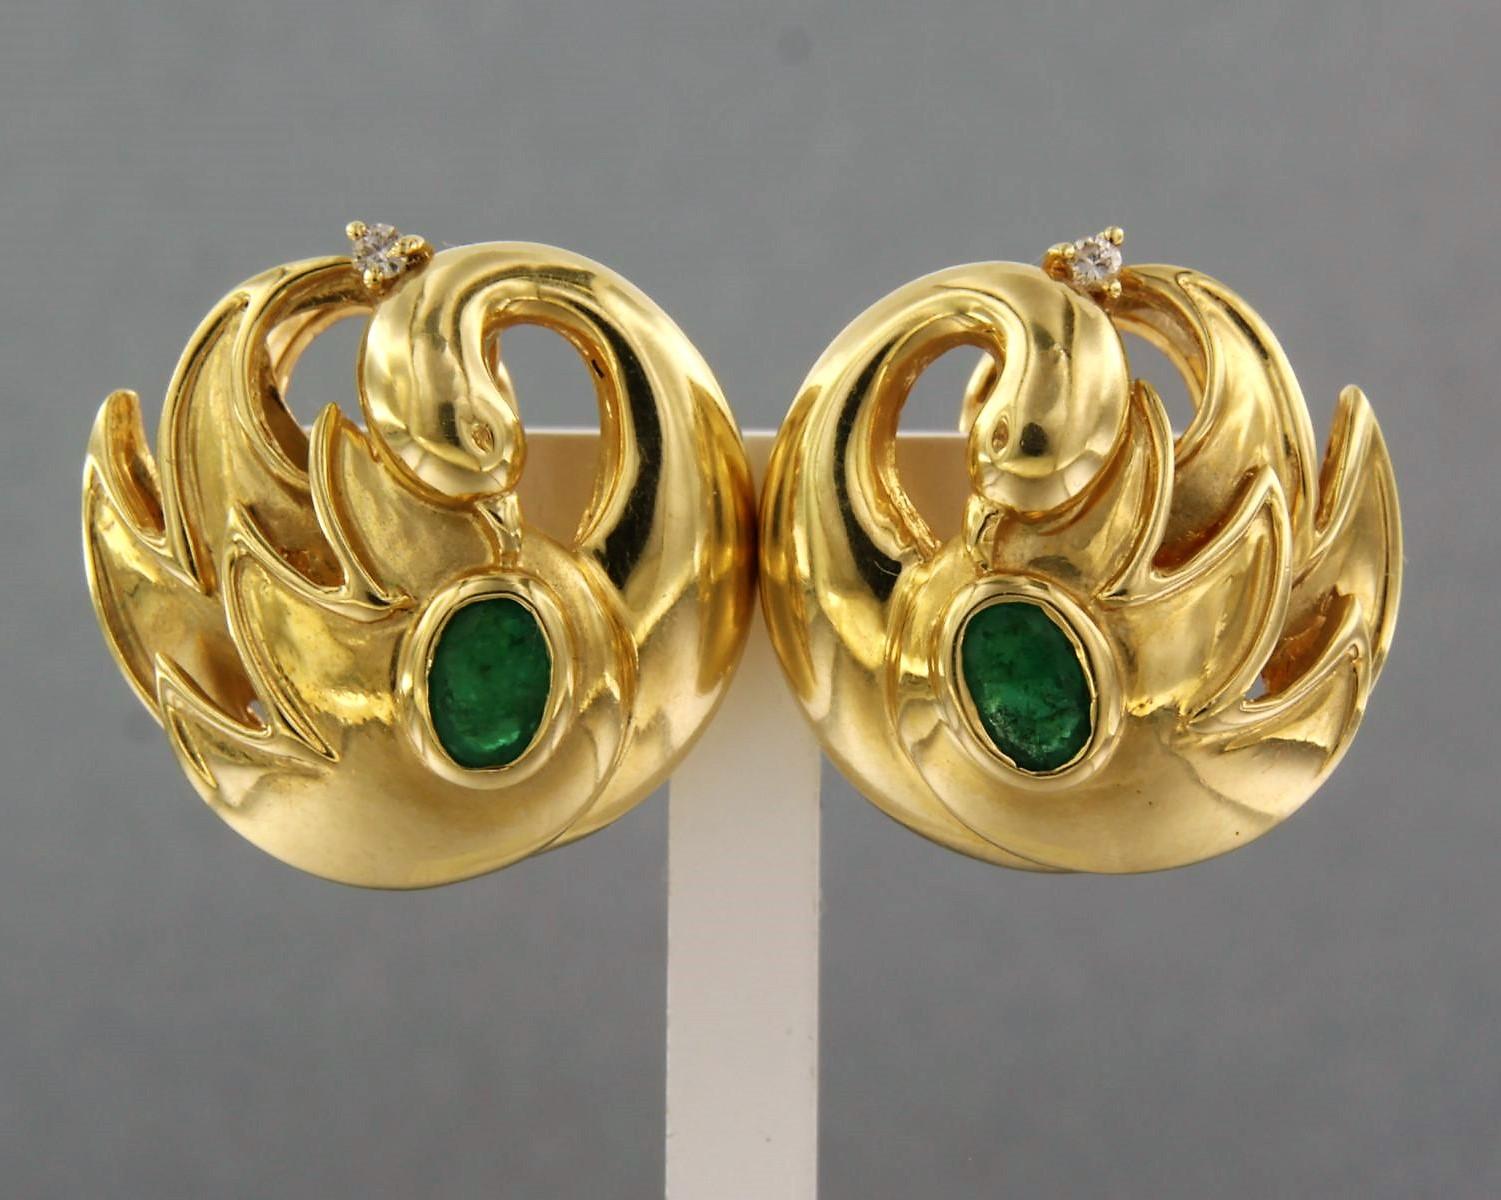 18 kt yellow gold ear clips set with emerald and brilliant cut diamond to. 0.06ct - K/L - SI

detailed description

the front of the earclips has a diameter of 2.1 cm wide

Total weight 14.6 grams

put with

- 2 x 5.0 mm x 3.5 mm oval faceted oiled